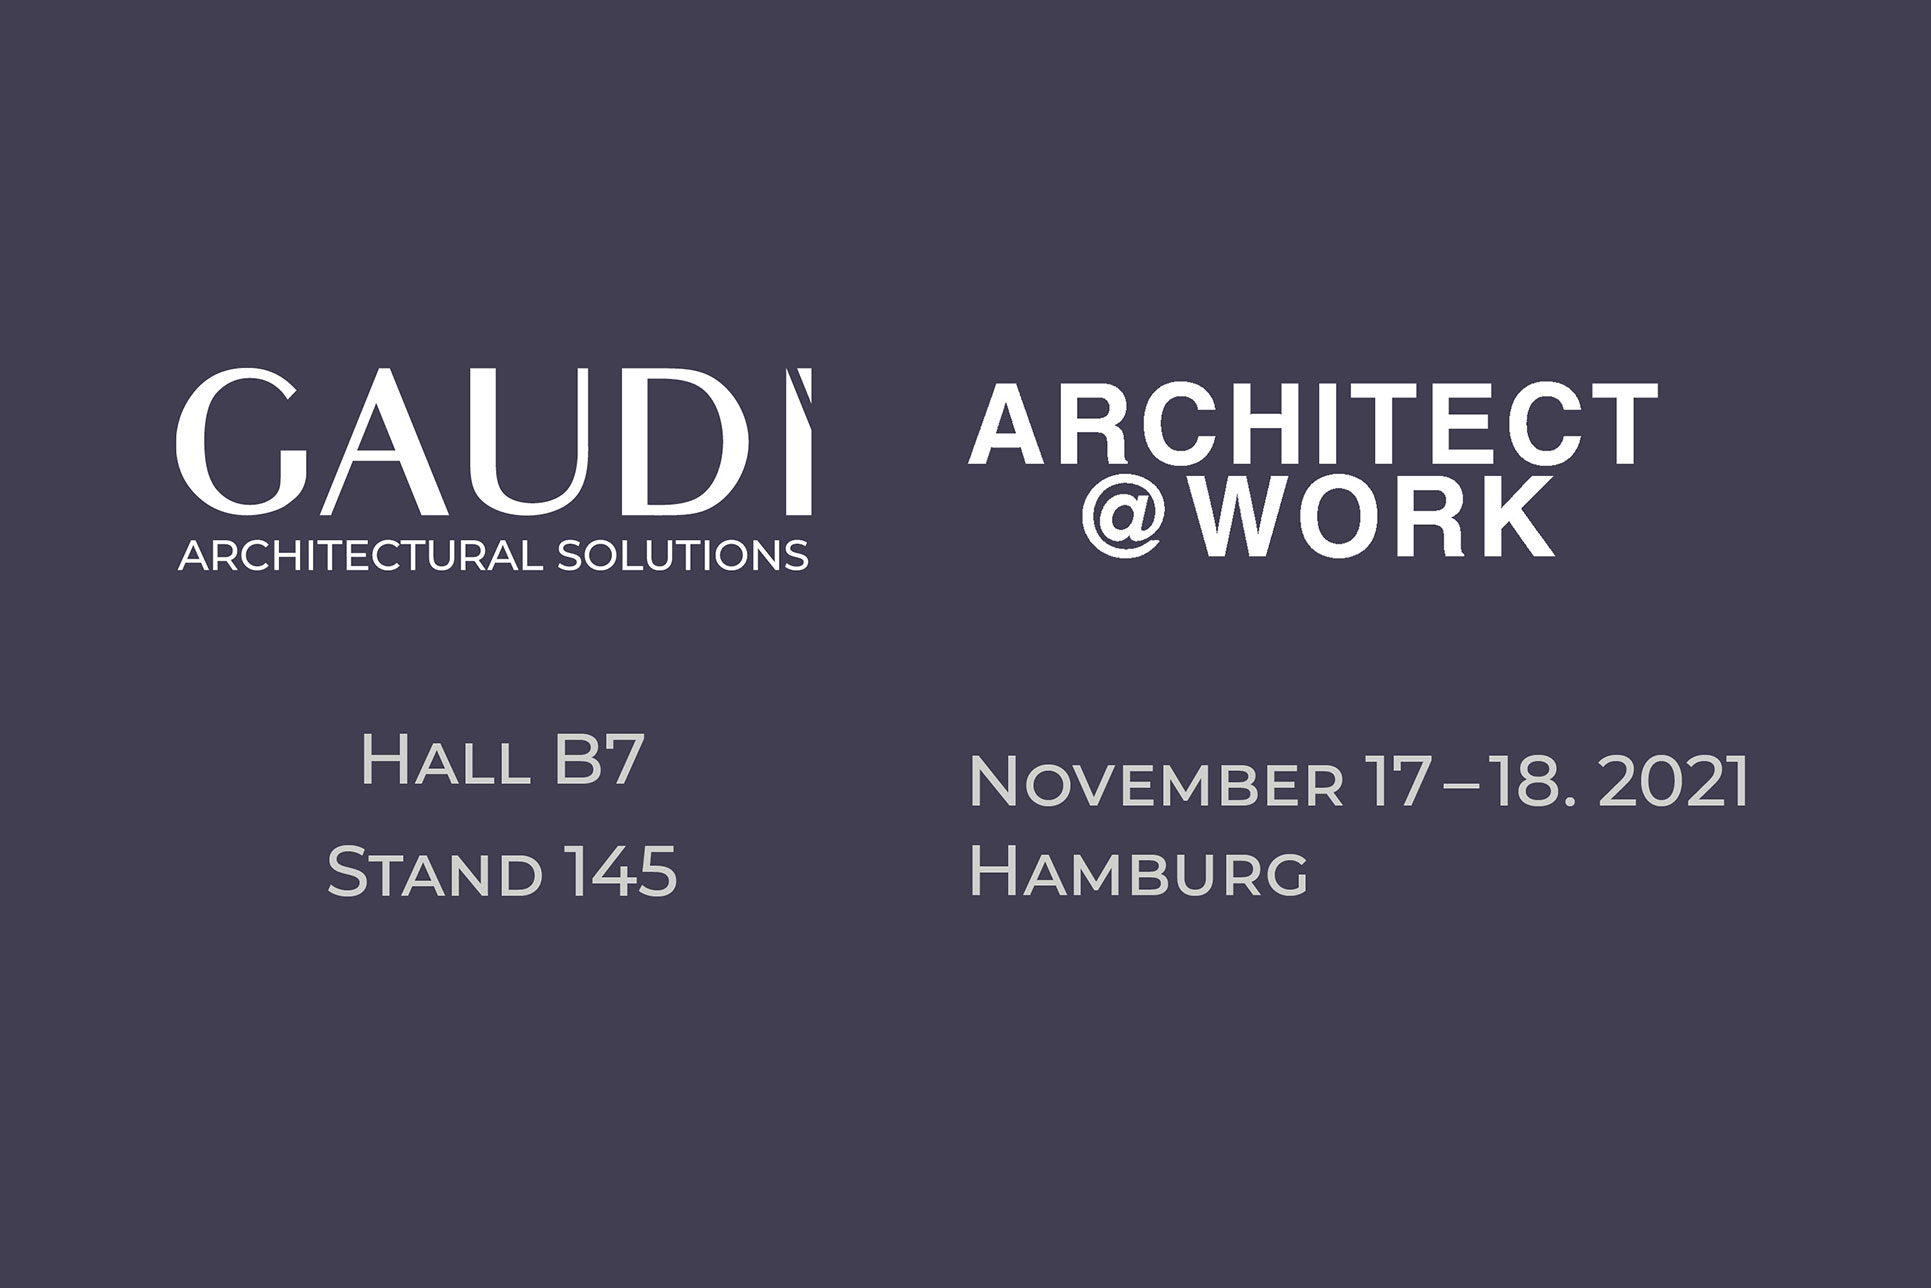 Gaudi brand at the ARCHITECT @ WORK exhibition